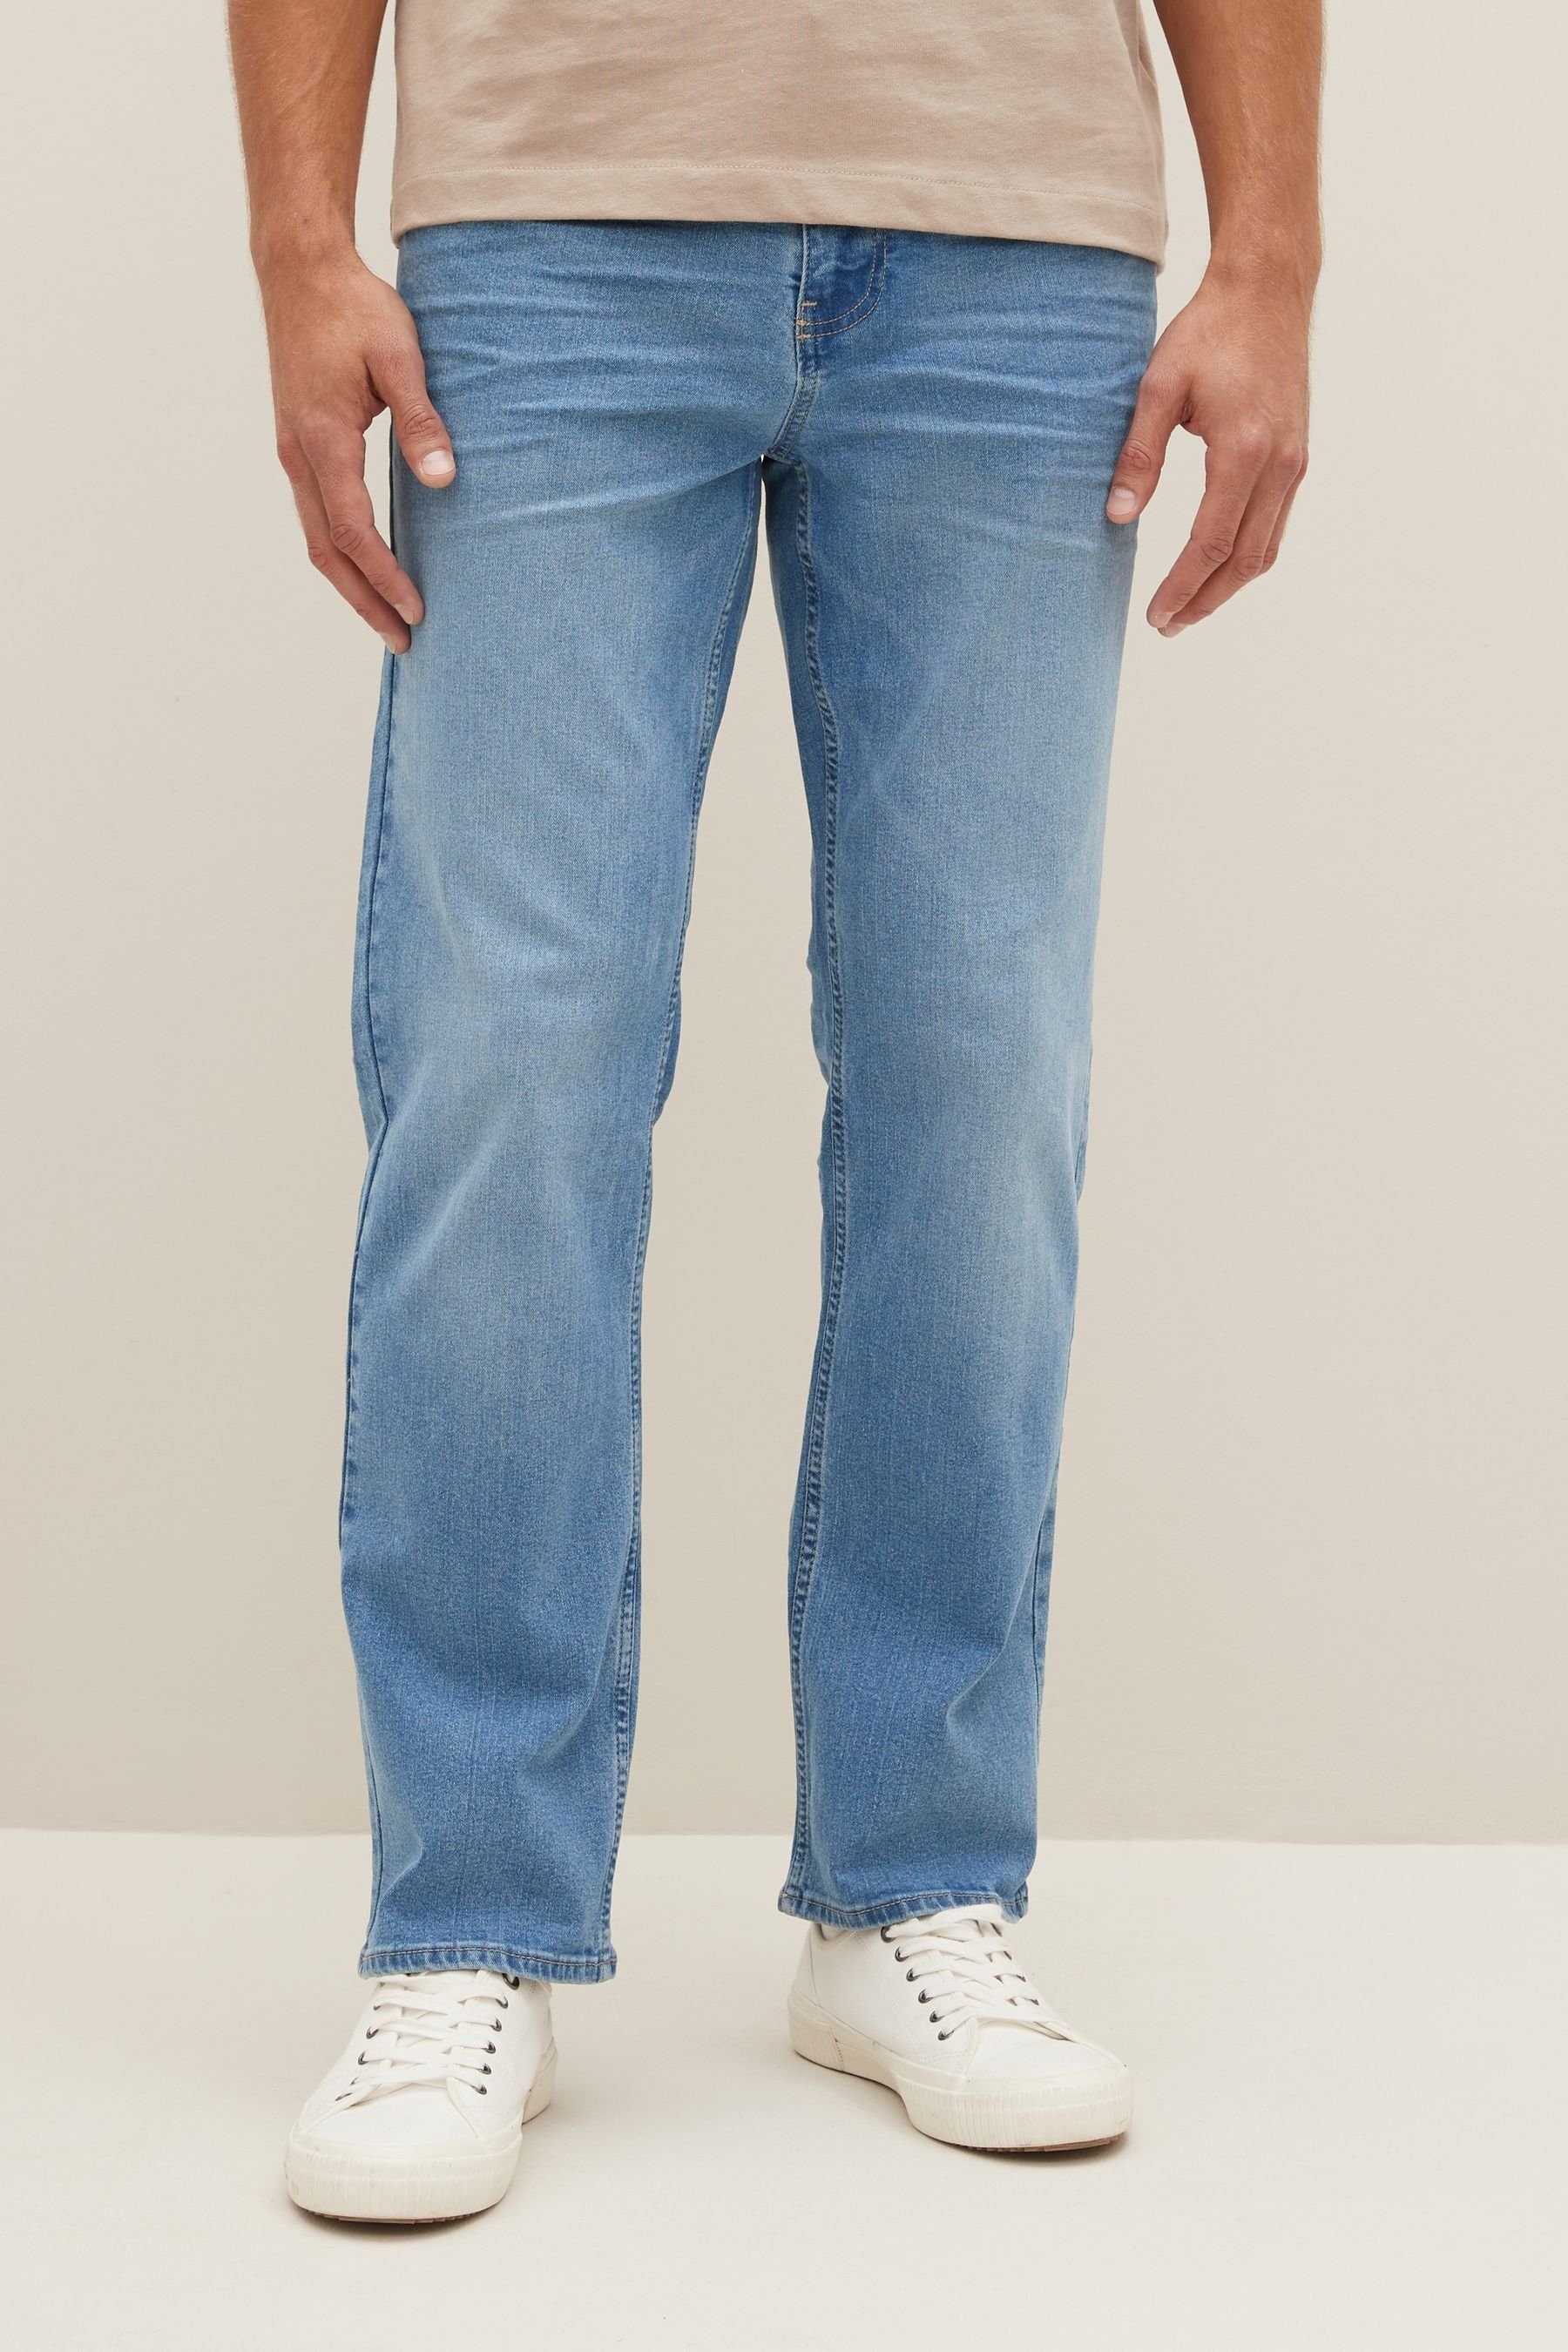 Straight-Jeans im Next Blue/Light Straight Mid (2-tlg) Stretch-Jeans 2er-Pack Blue Fit Essential